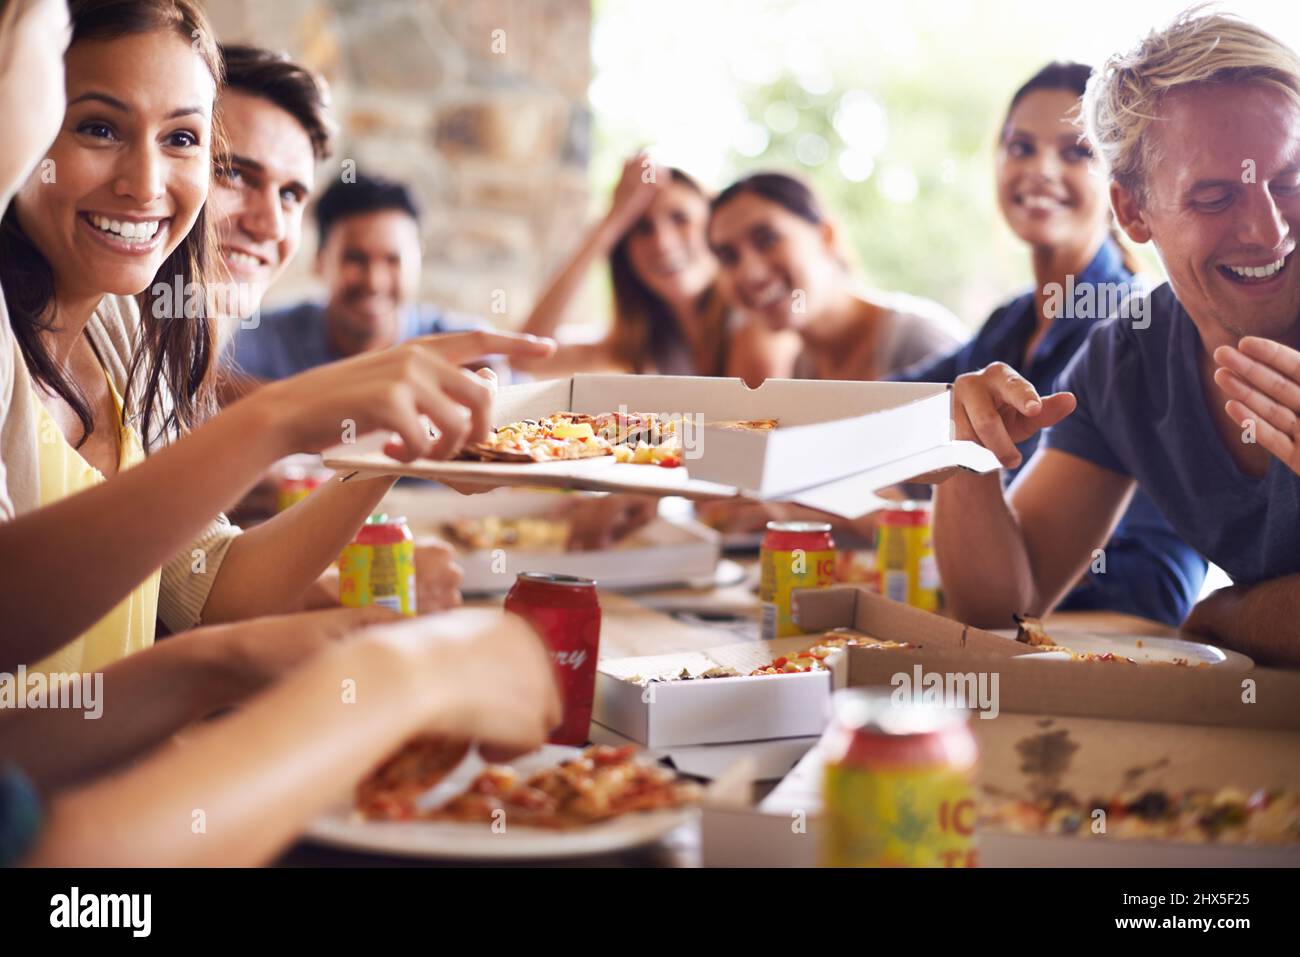 Good times with great pizza. Cropped shot of a group of friends enjoying pizza together. Stock Photo